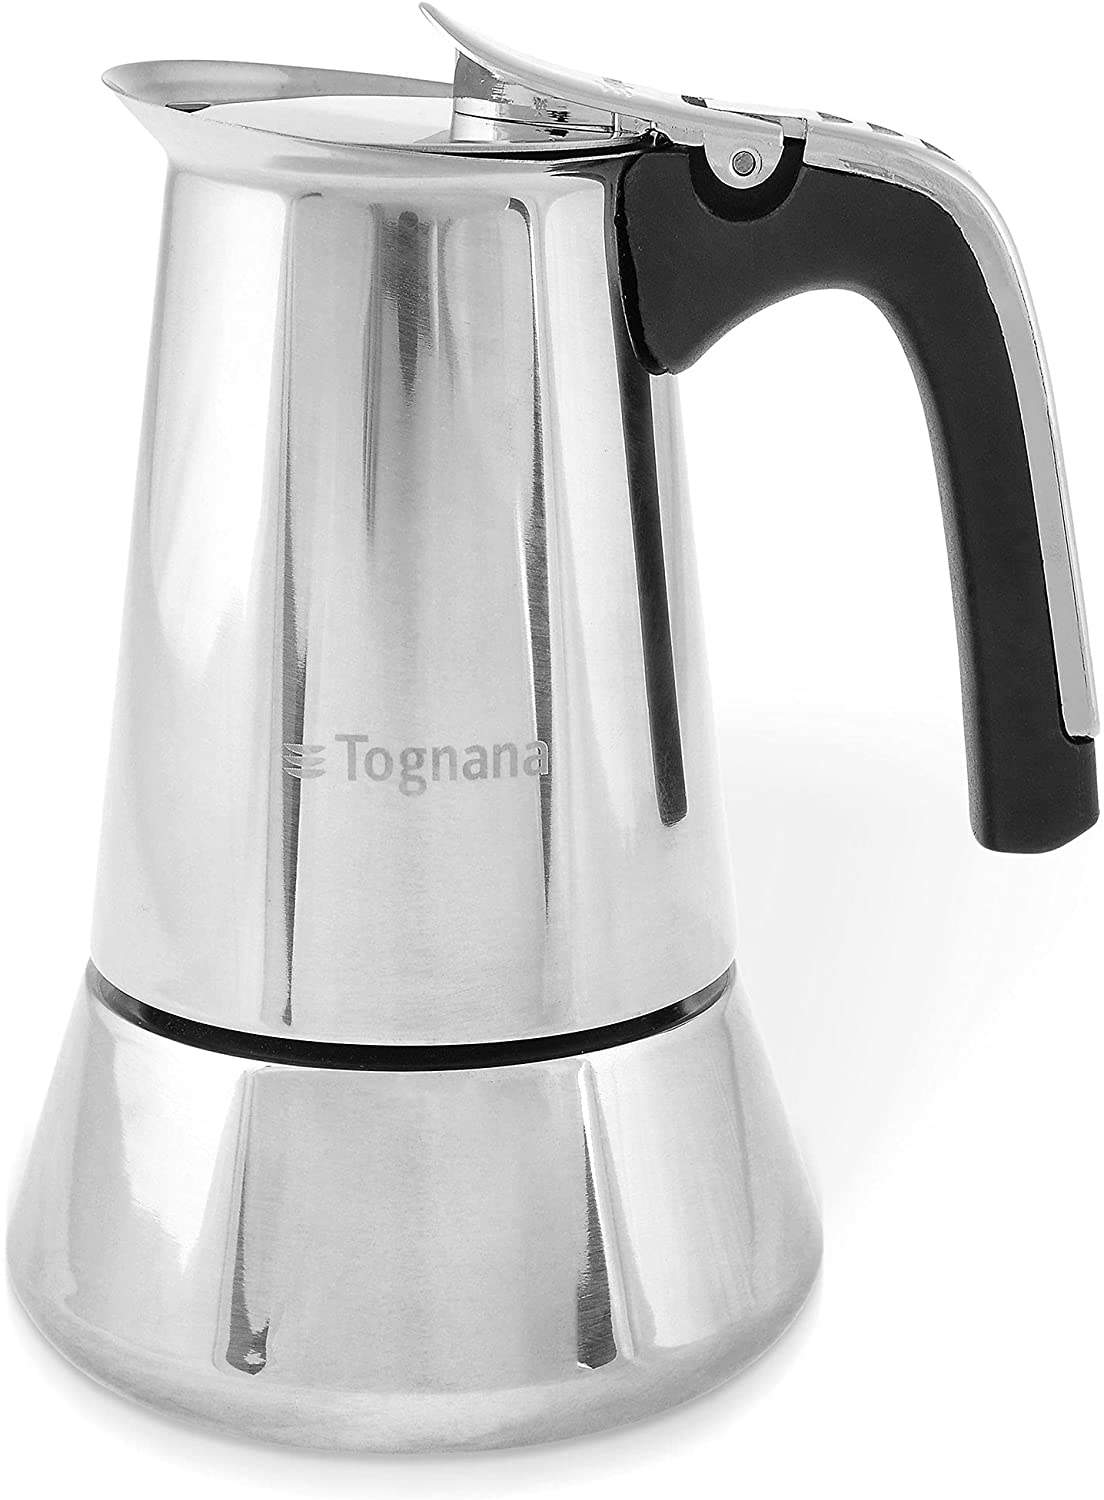 Tognana Riflex Induction 4 Cup Coffee Maker in Stainless Steel, Silver